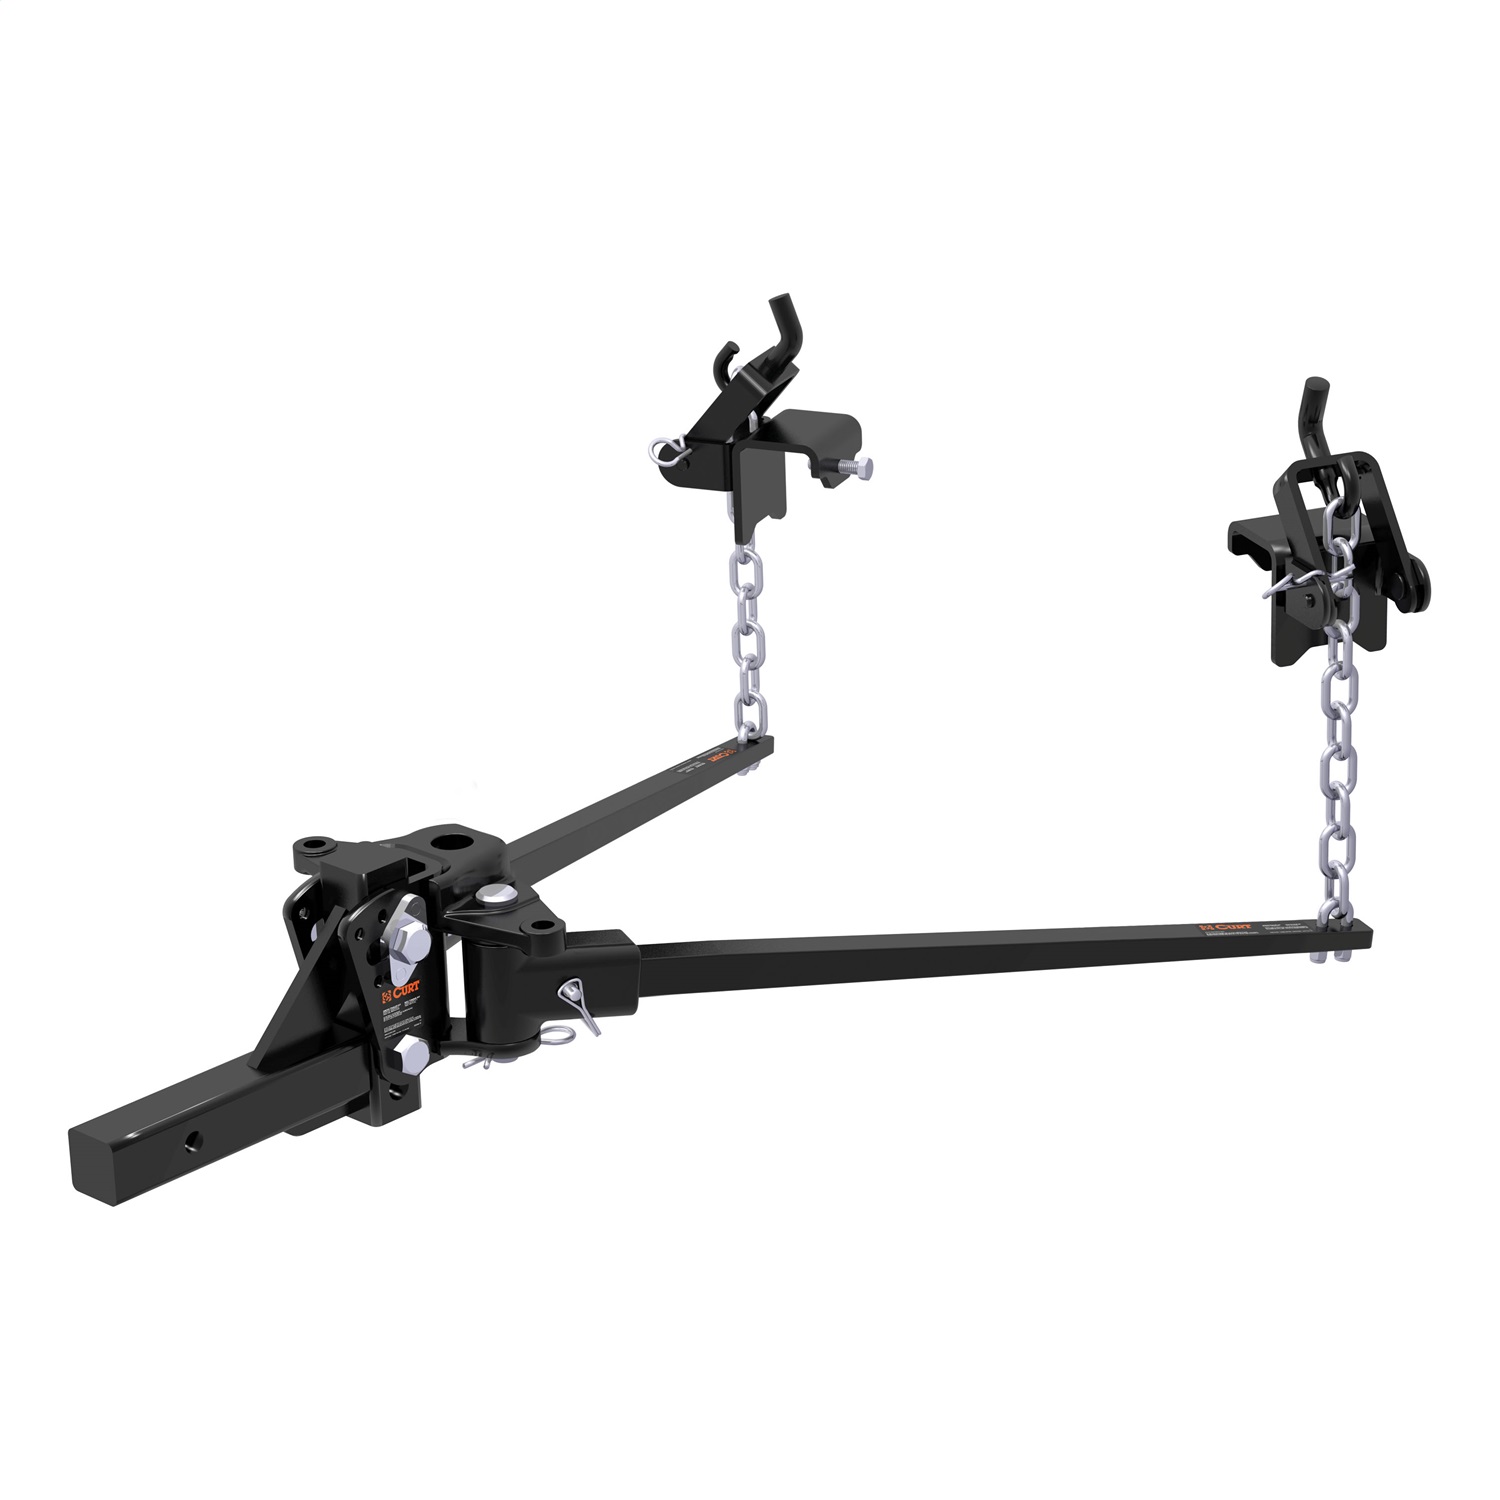 CURT Manufacturing CURT Manufacturing 17341 Weight Distributing Hitch; Trunion Bar  Fits